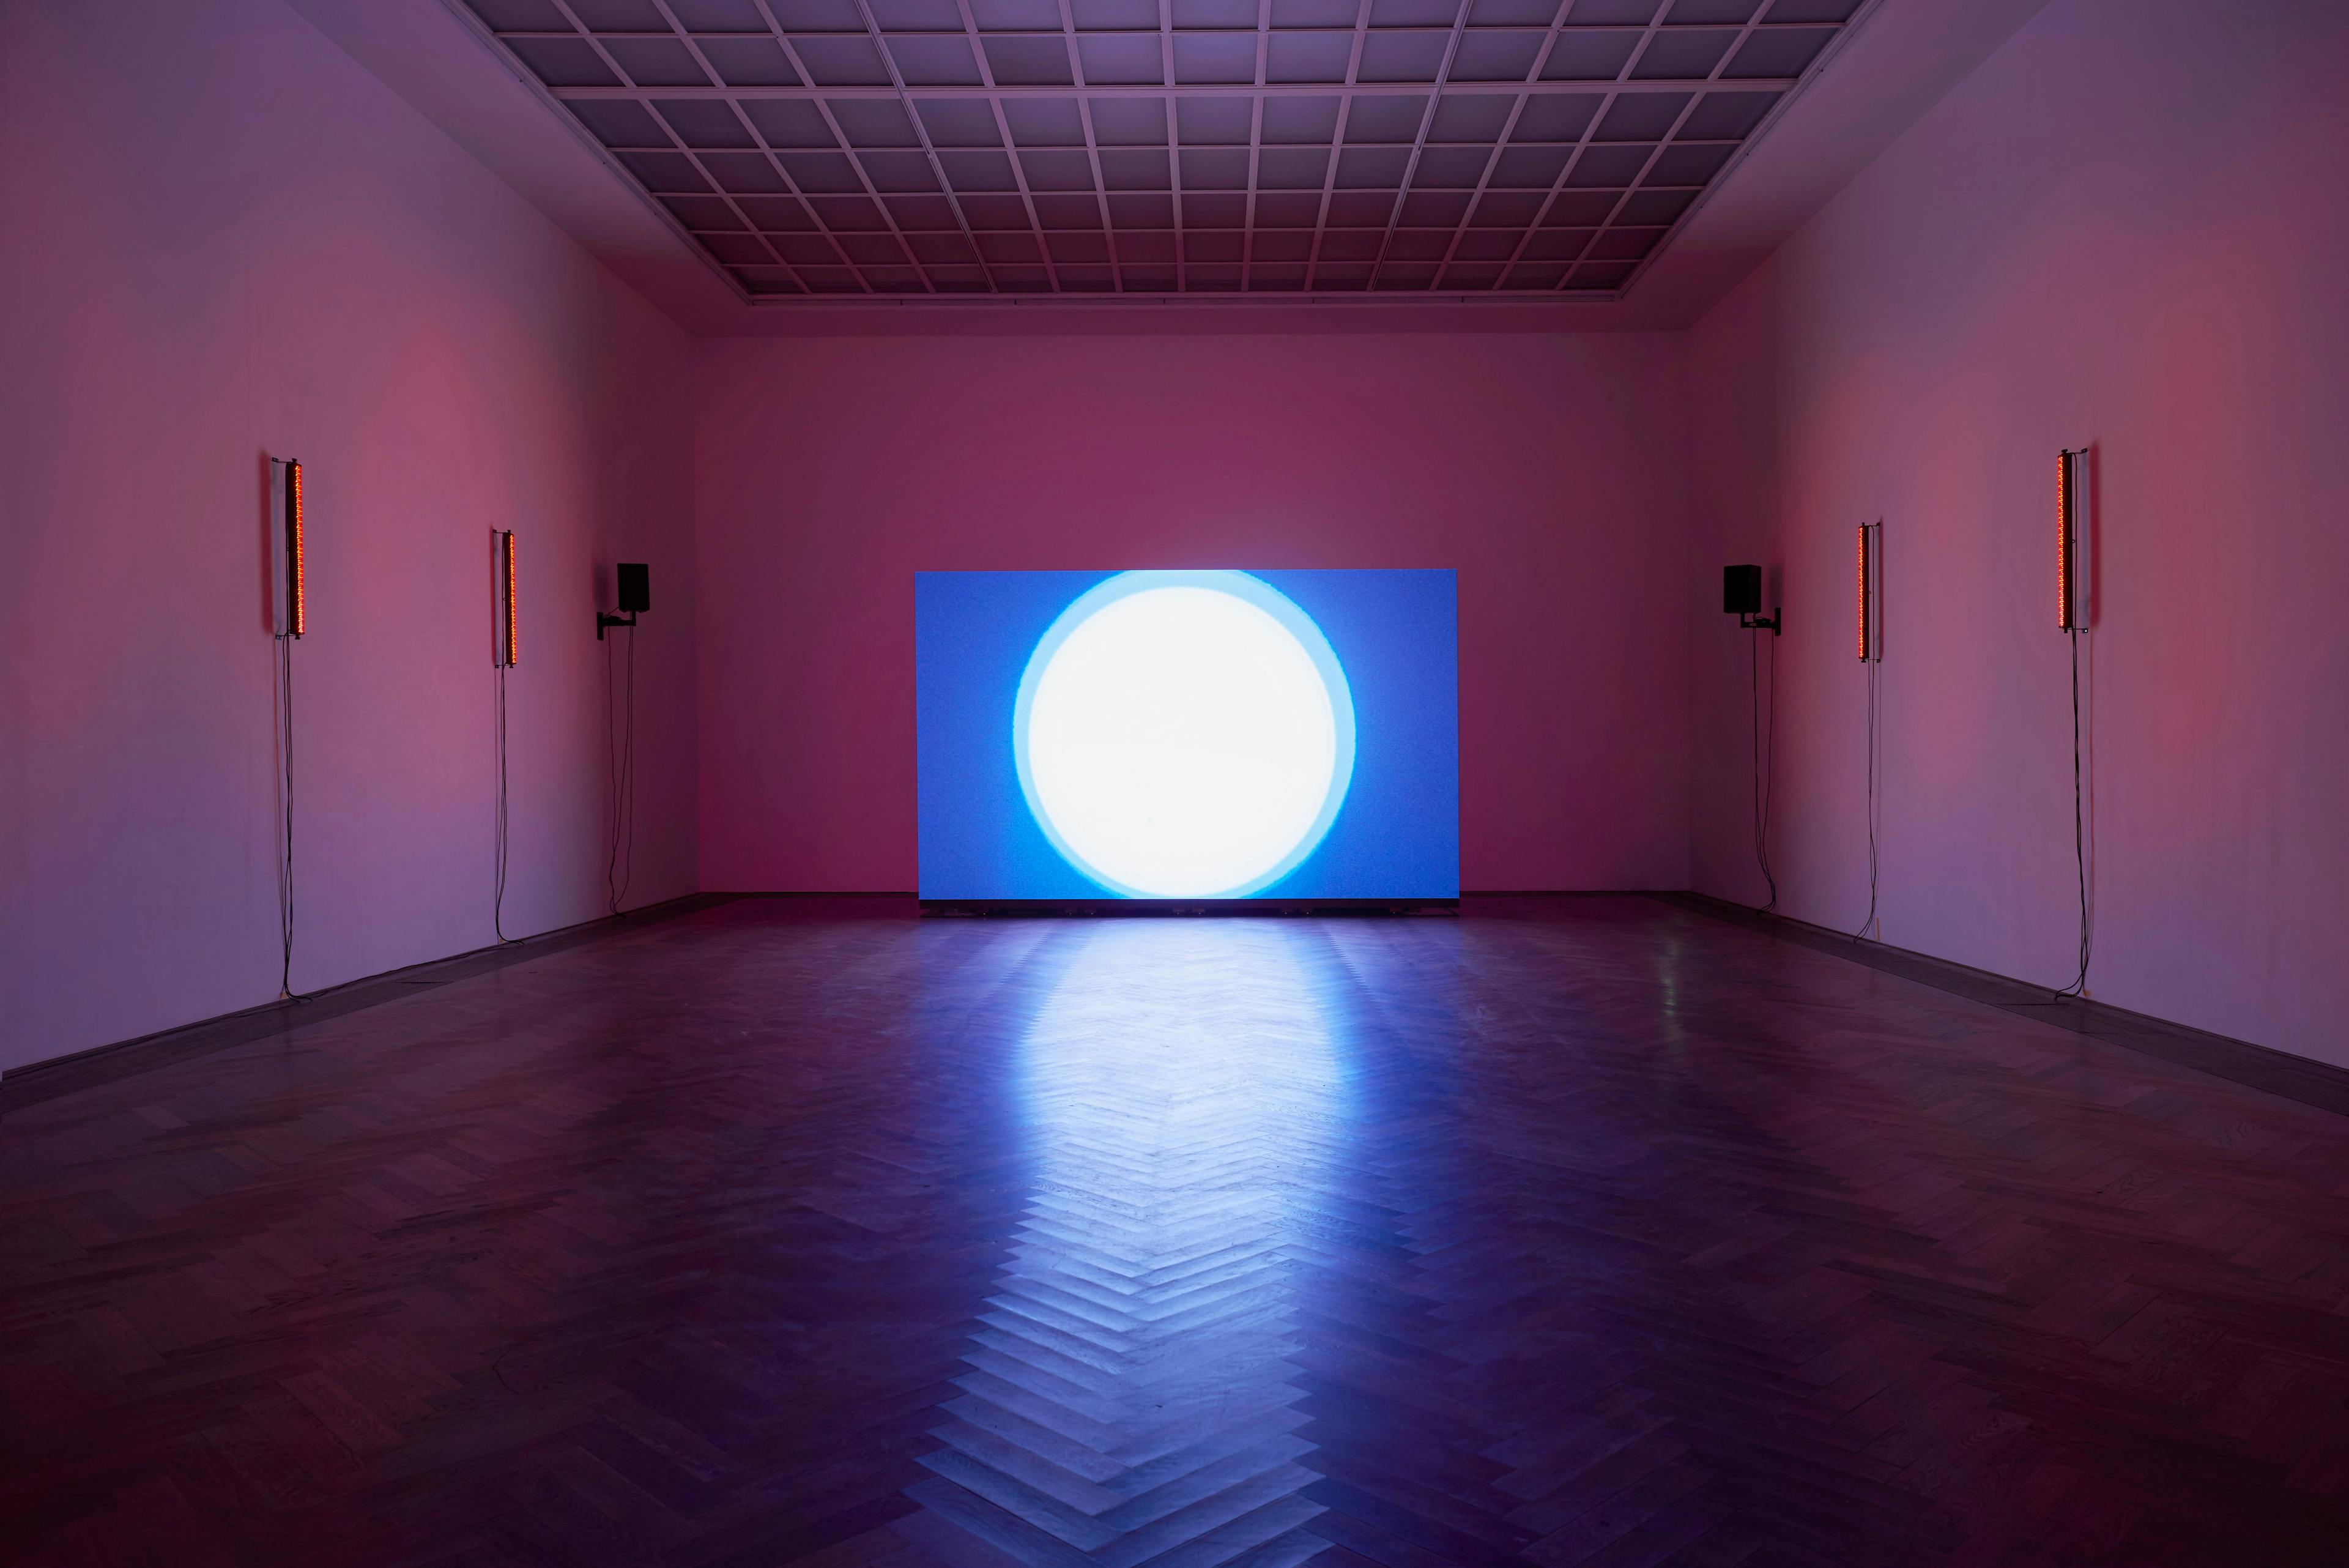 A gallery space with pink glowing light. On either side, red neon lights are fixed to the walls. In the centre, a large canvas shows a white glowing ball with blue around it.